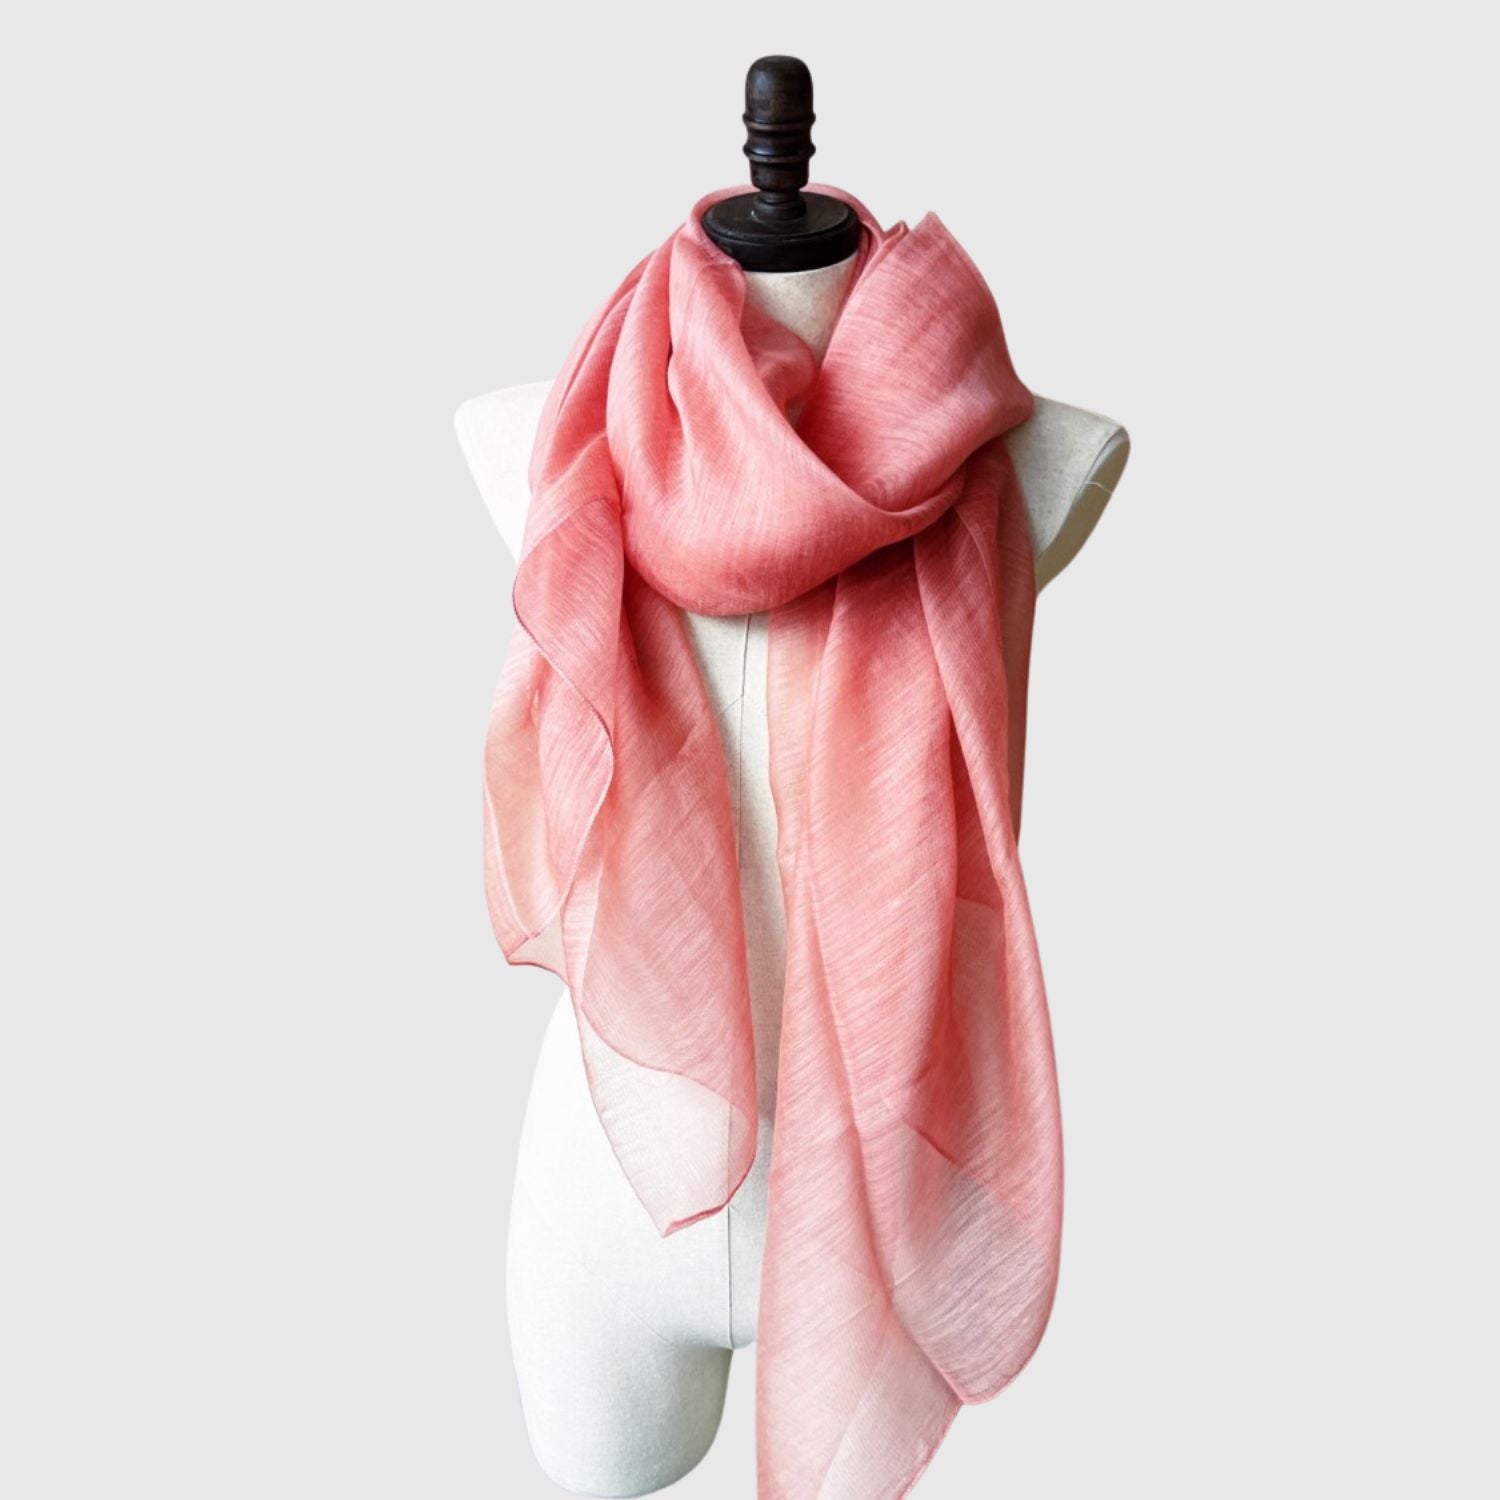 shop best silk wool scarf, oversized large merino wool scarves and shawls 